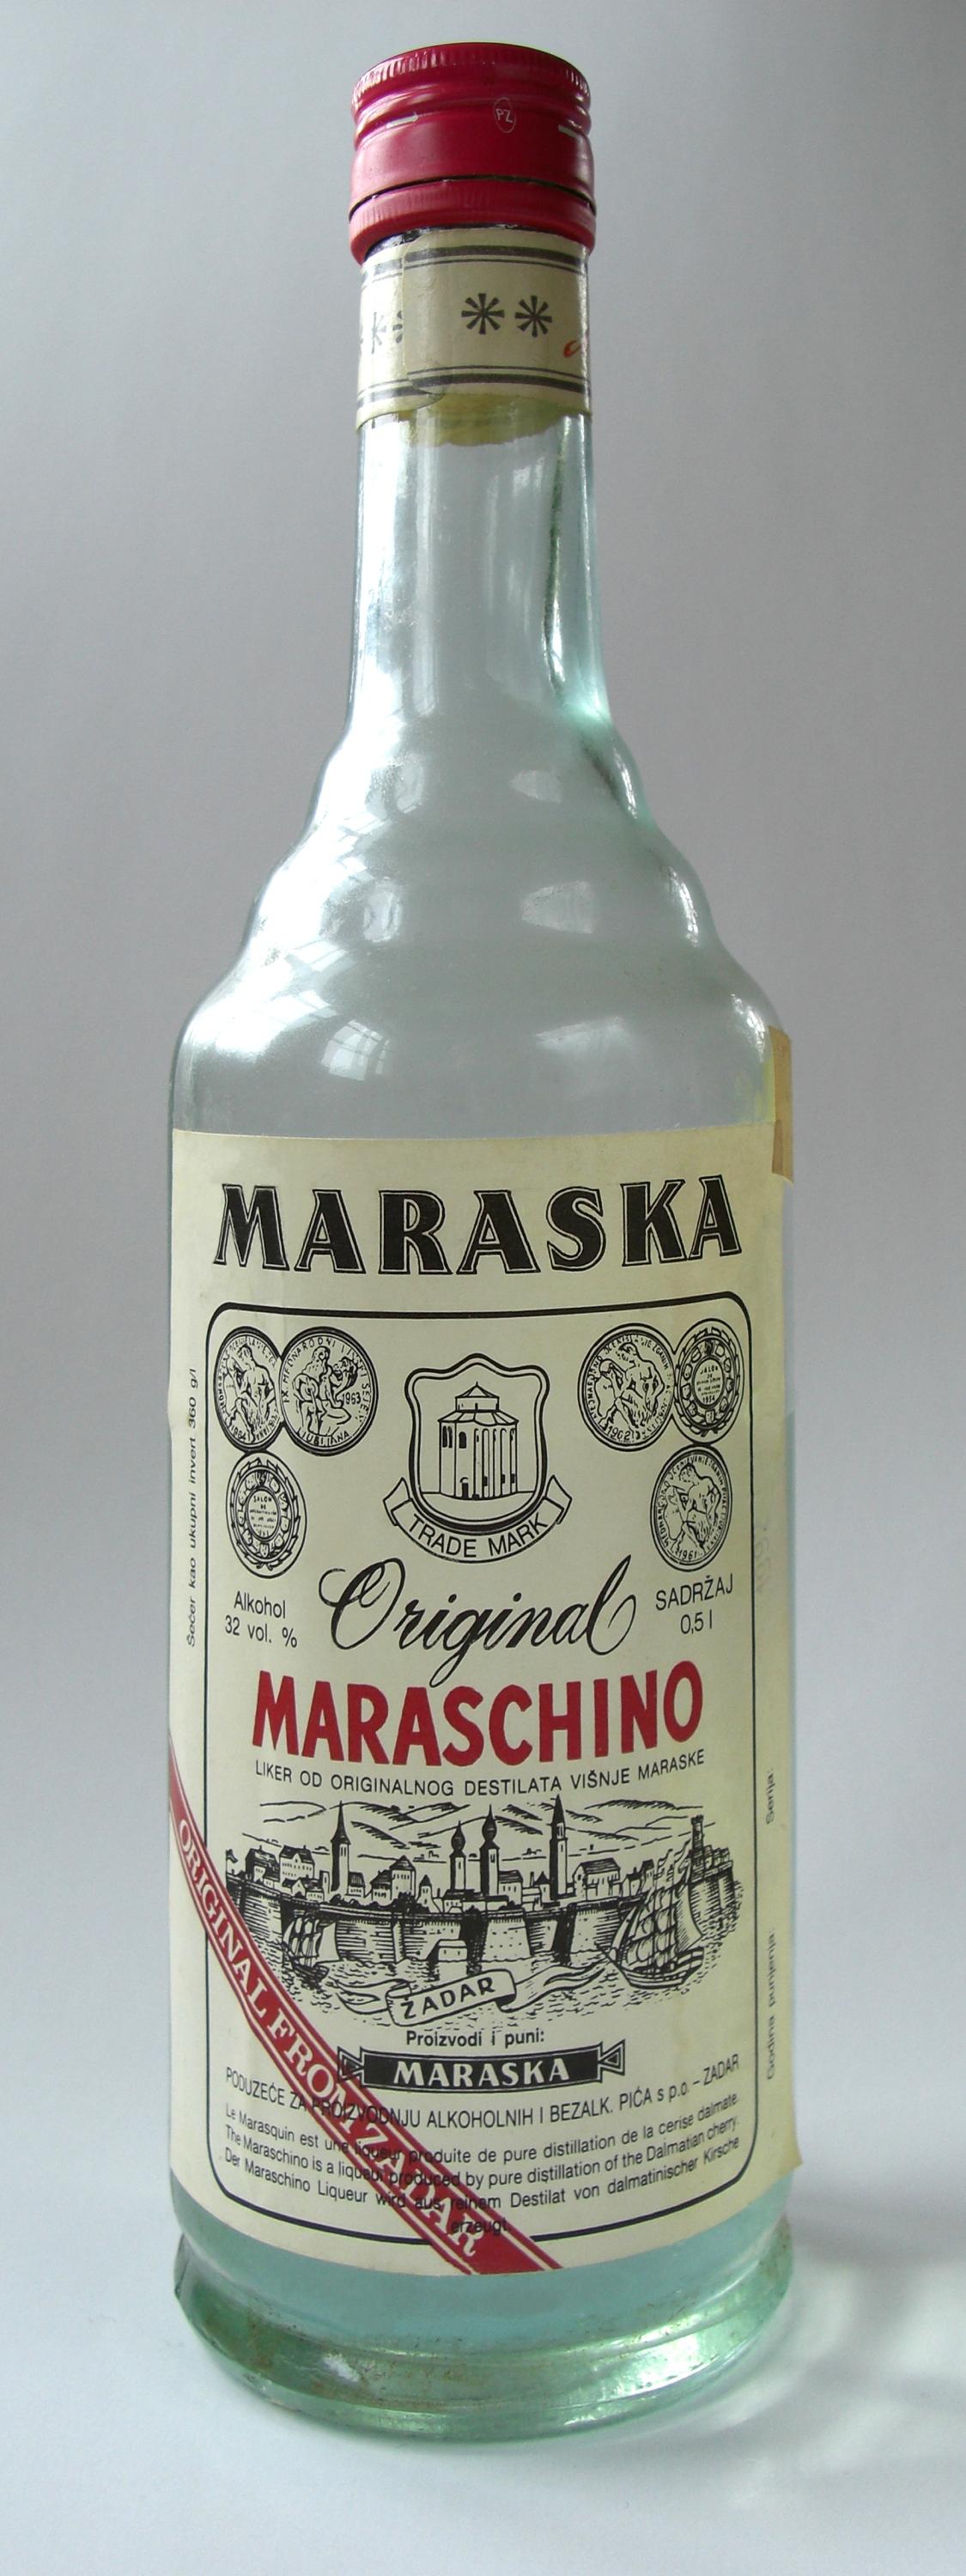 Maraschino liqueur, made from Maraska sour cherries, is dry and slightly bitter with almond notes. (Public Domain)